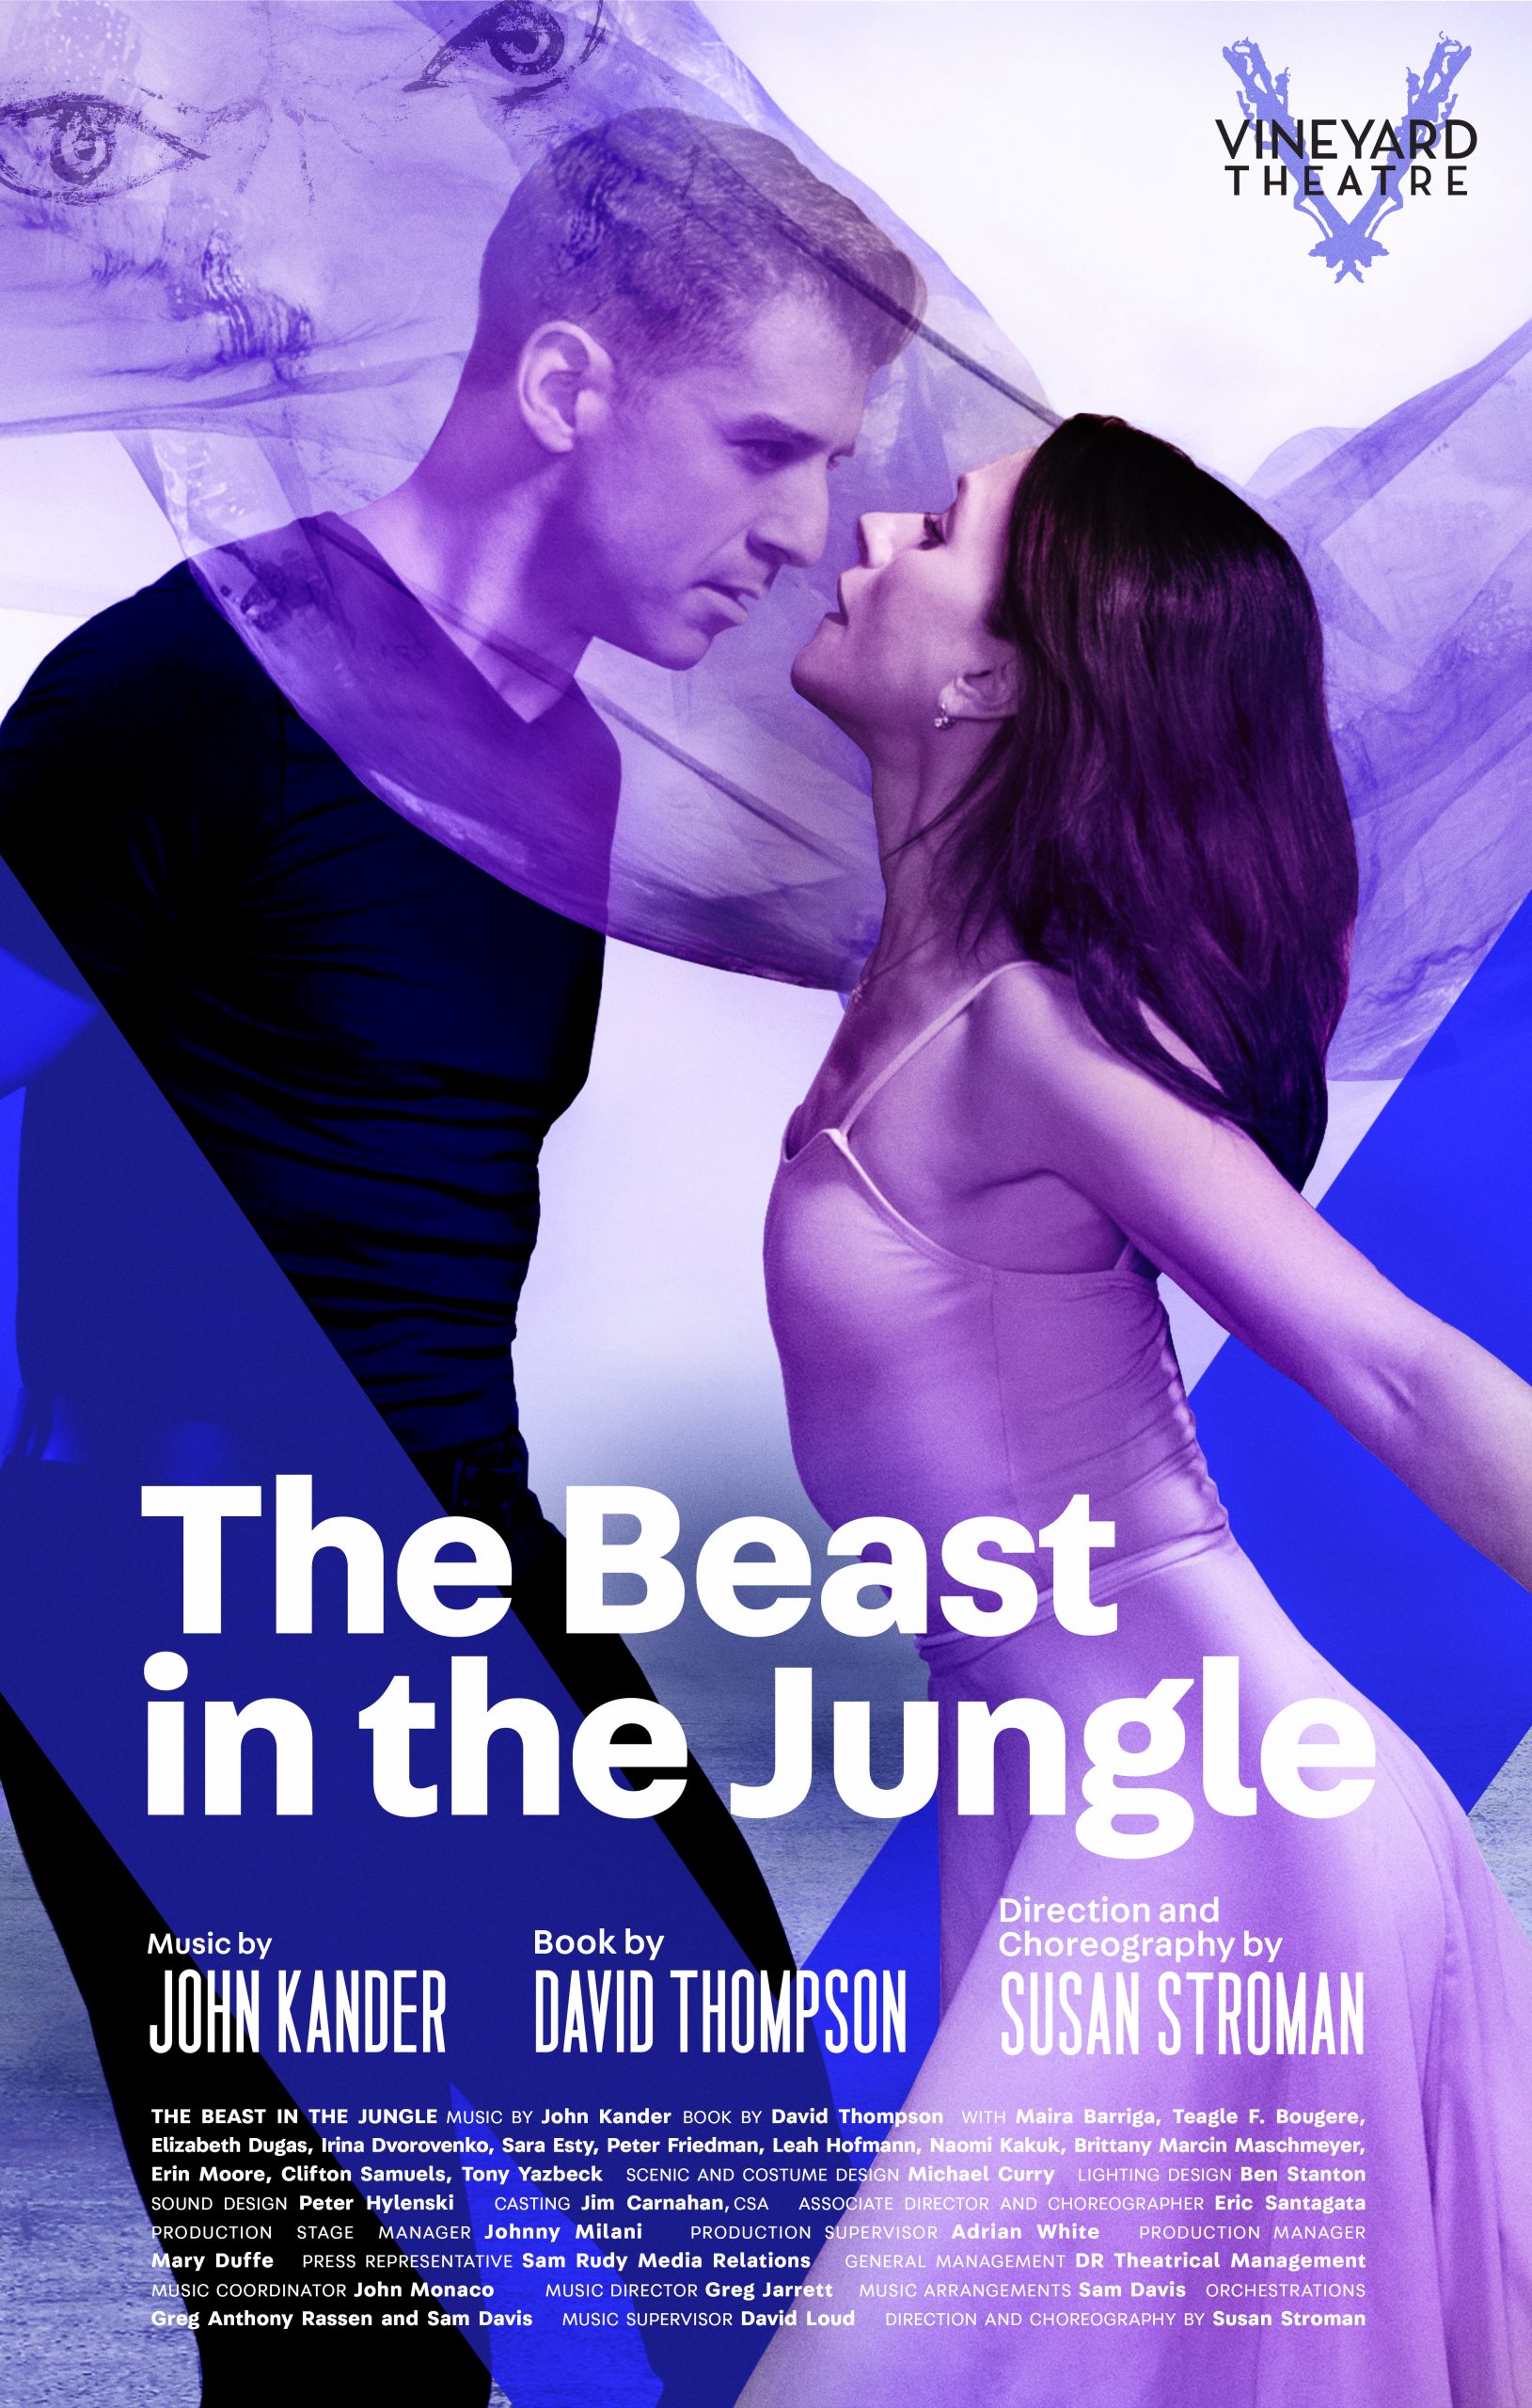 The Beast in the Jungle | Vineyard Theatre